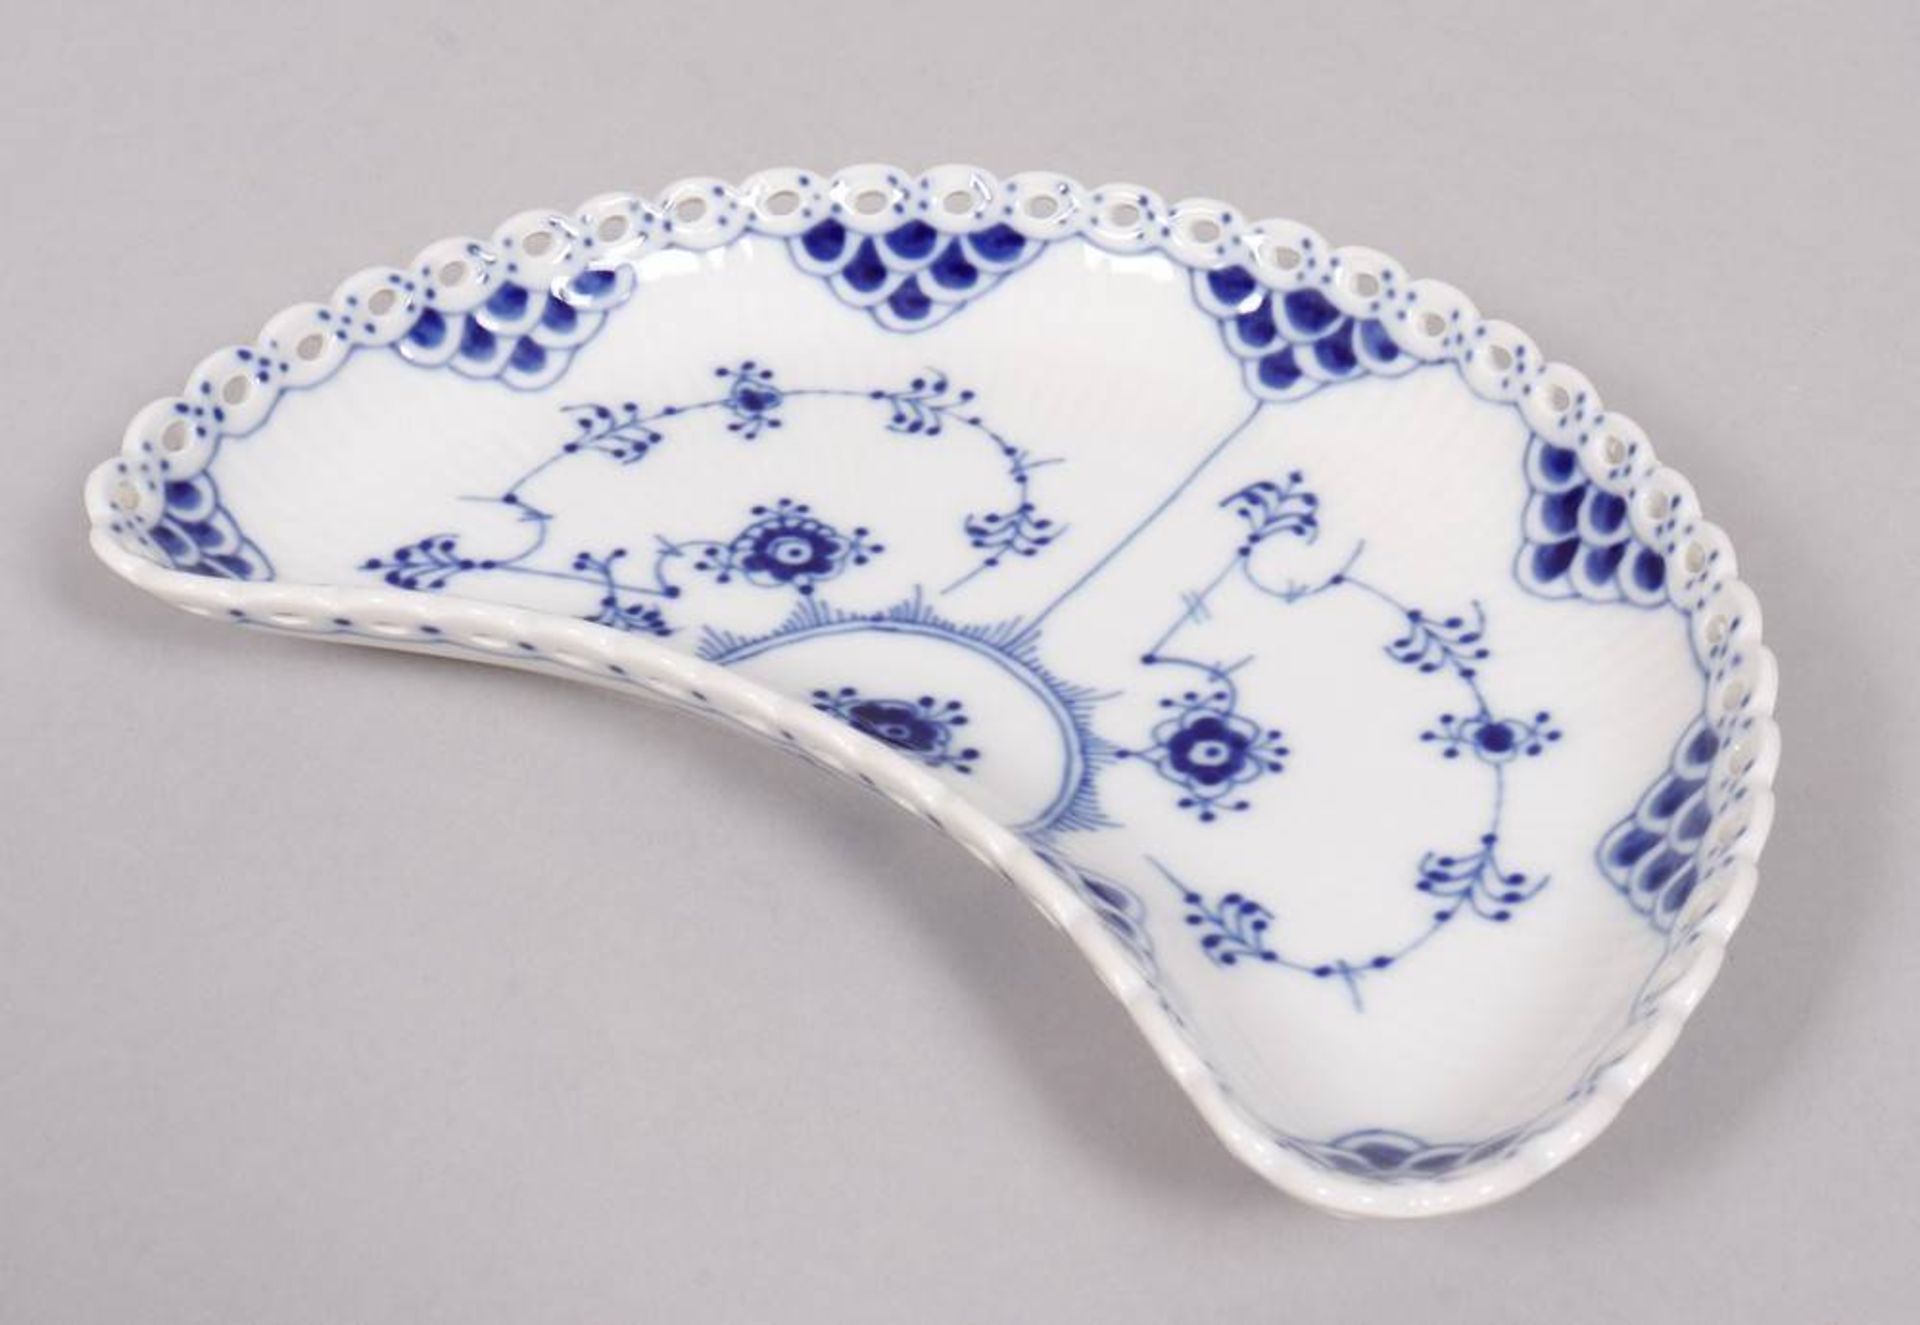 Small lot of porcelain, Royal Copenhagen, late 20th C., "Musselmalet" decor - Image 2 of 8